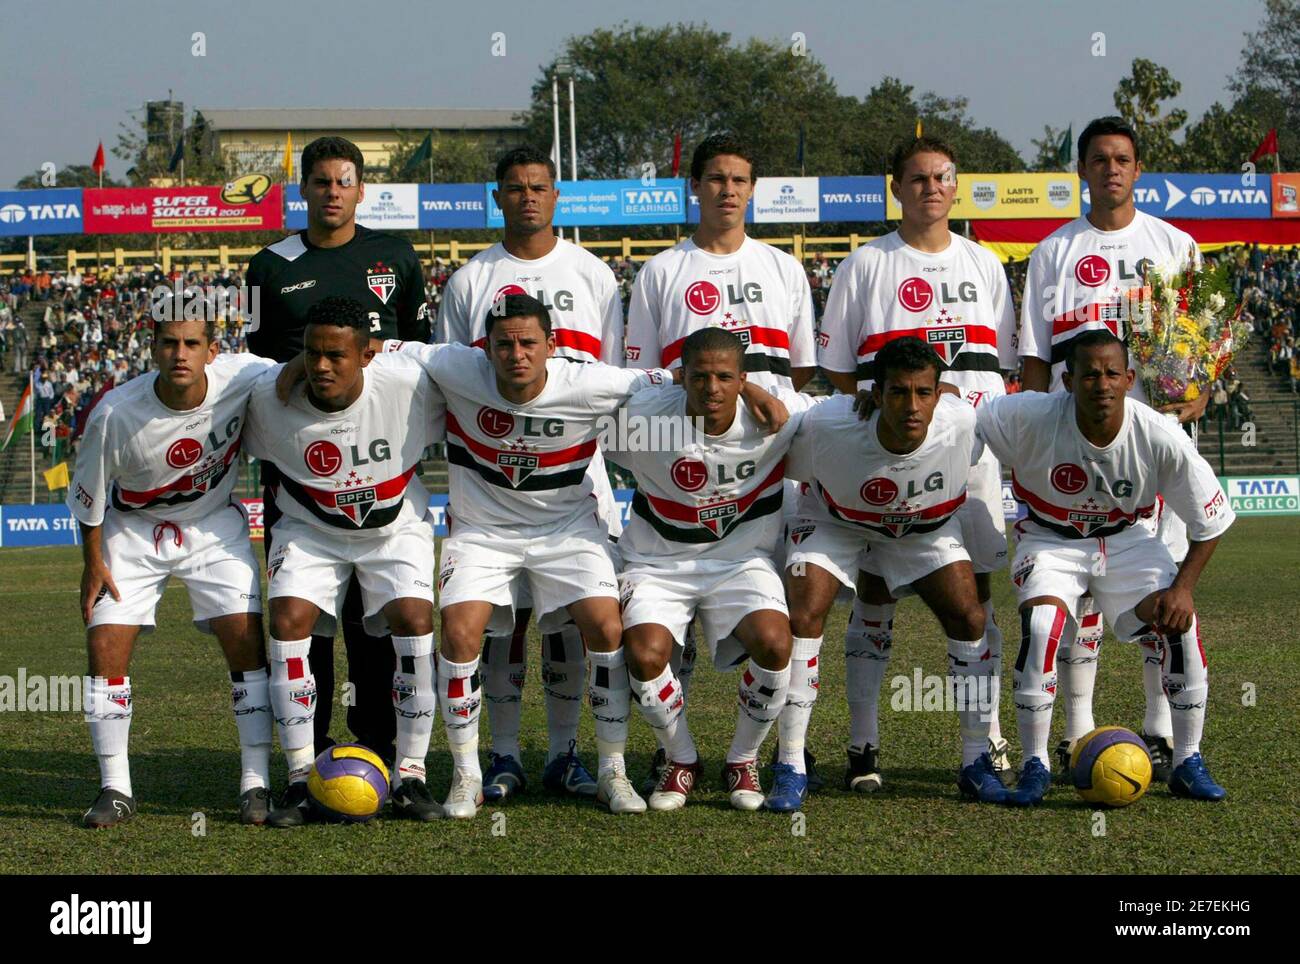 Players of the Brazilian soccer team from Sao Paulo club pose for a picture  after their match with the Indian soccer team from East Bengal in Siliguri  January 27, 2007. Sao Paulo